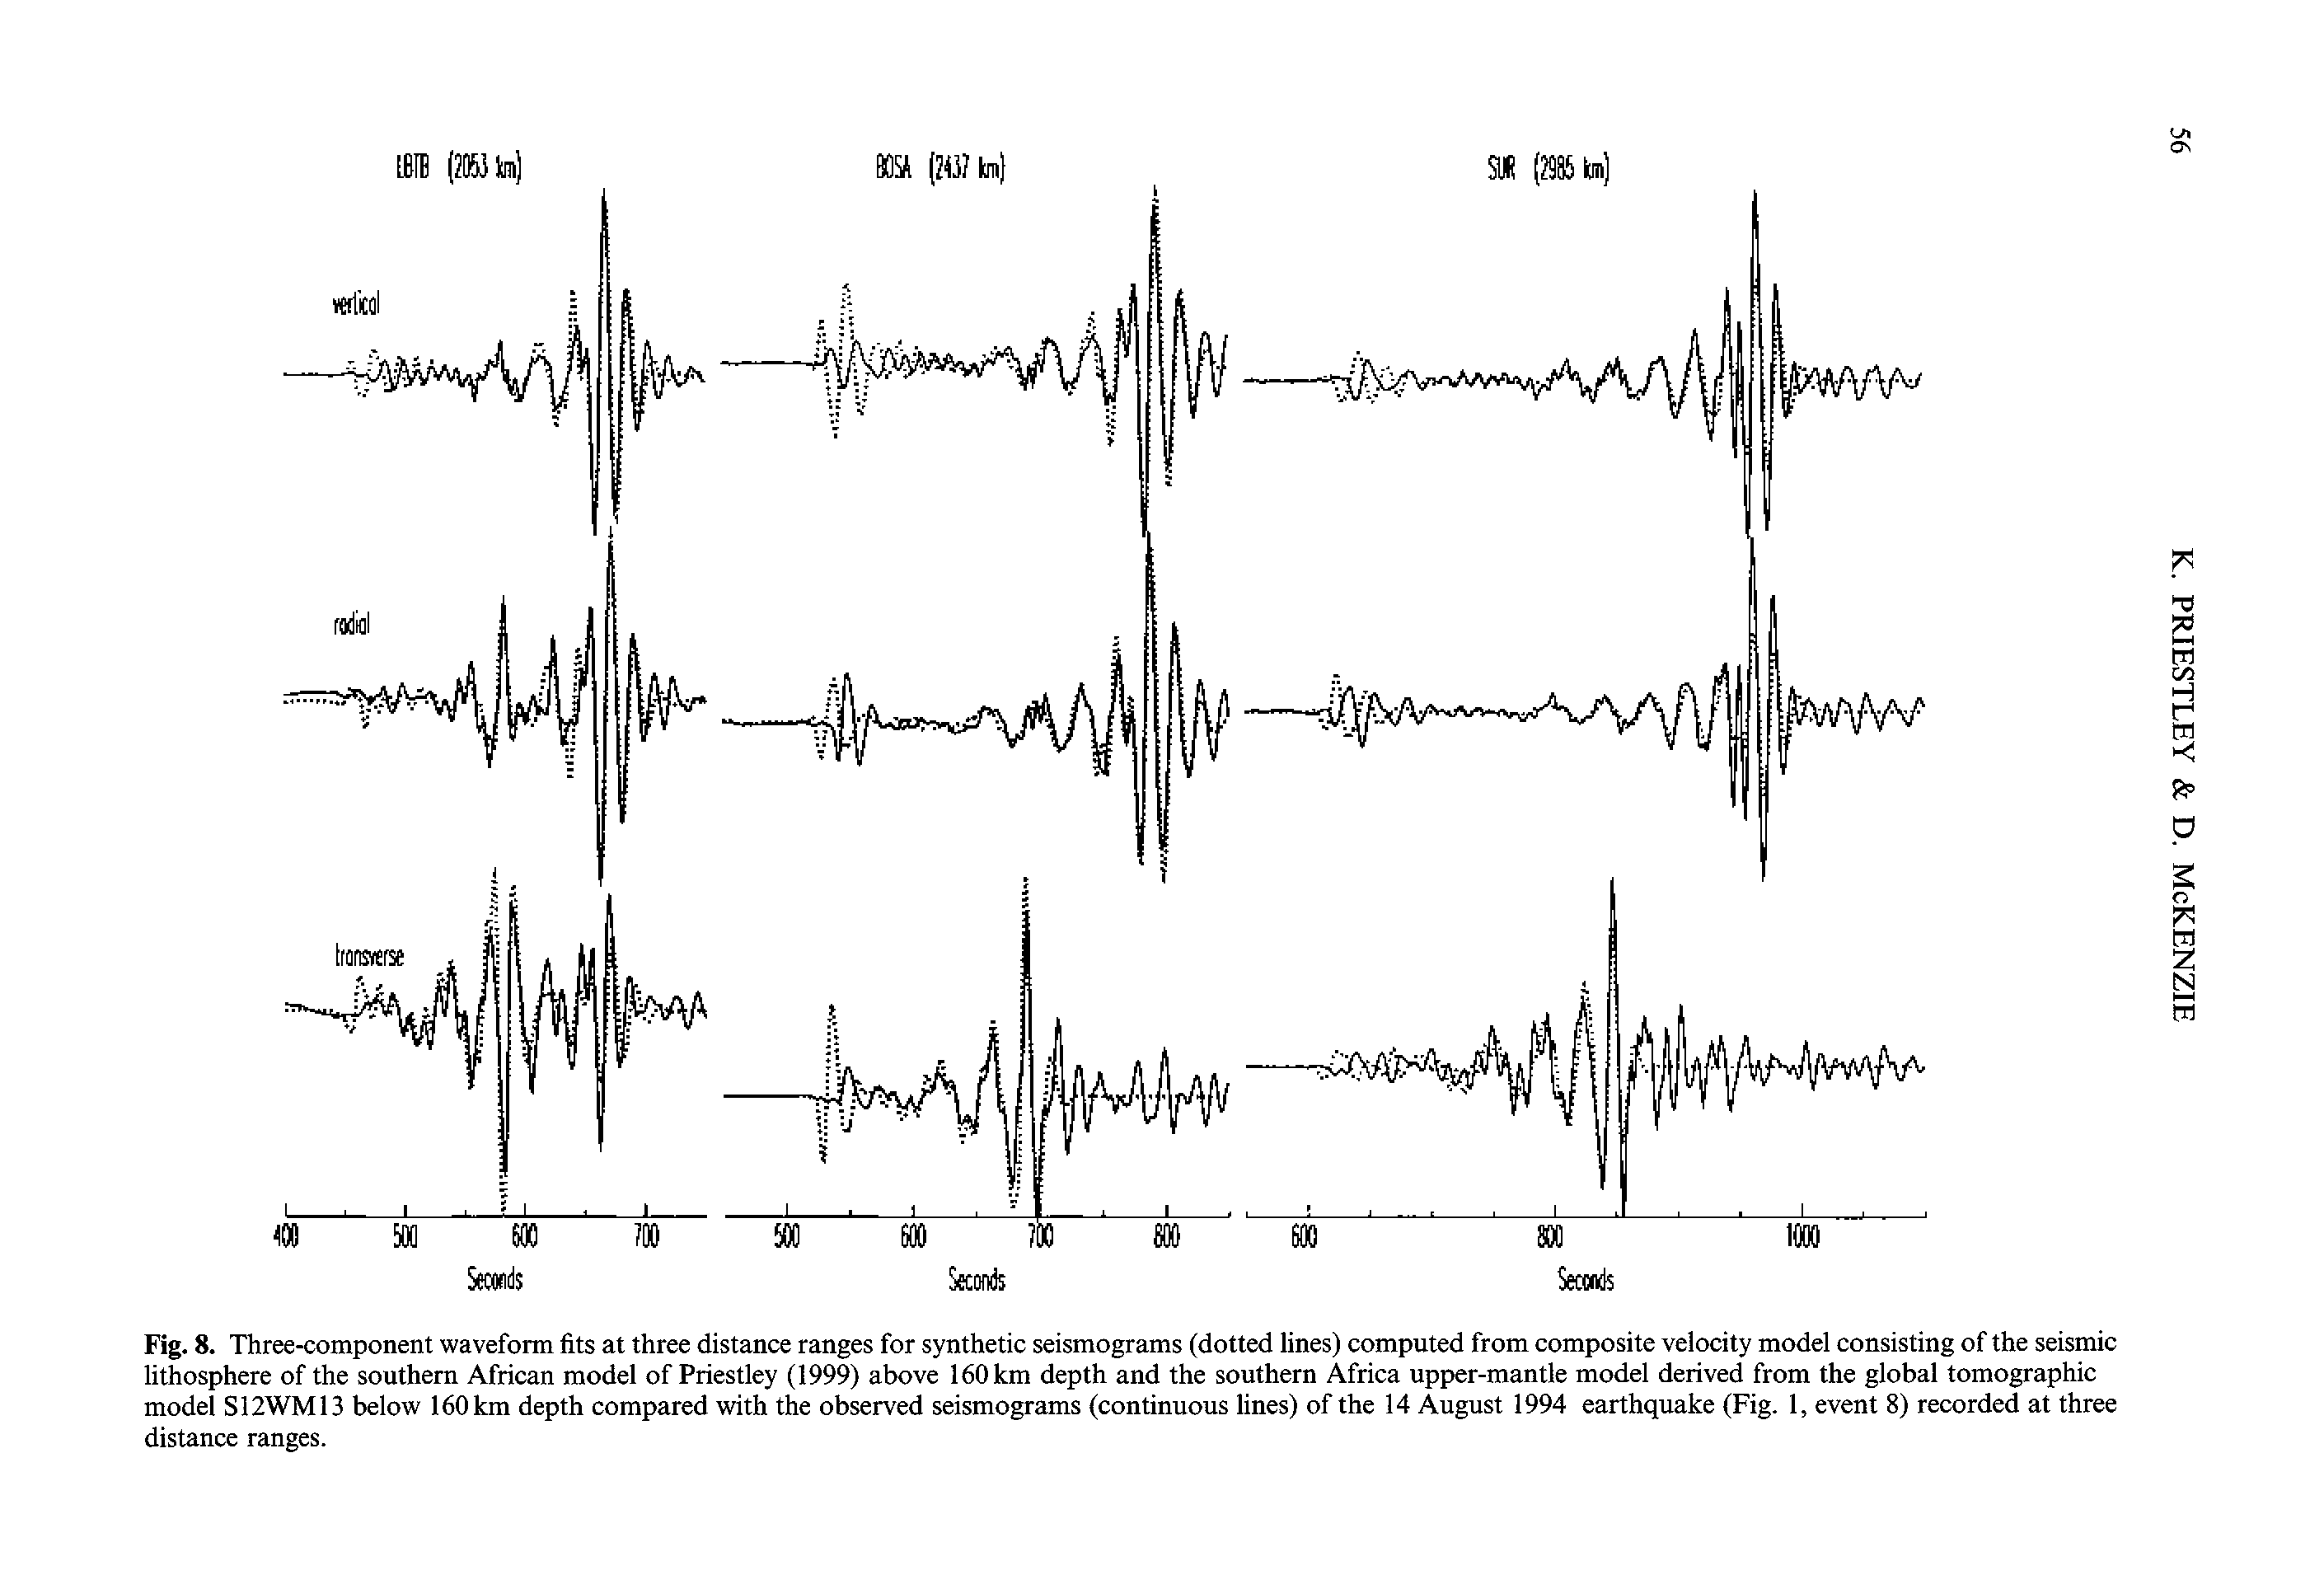 Fig. 8. Three-component waveform fits at three distance ranges for synthetic seismograms (dotted lines) computed from composite velocity model consisting of the seismic lithosphere of the southern African model of Priestley (1999) above 160 km depth and the southern Africa upper-mantle model derived from the global tomographic model S12WM13 below 160 km depth compared with the observed seismograms (continuous lines) of the 14 August 1994 earthquake (Fig. 1, event 8) recorded at three distance ranges.